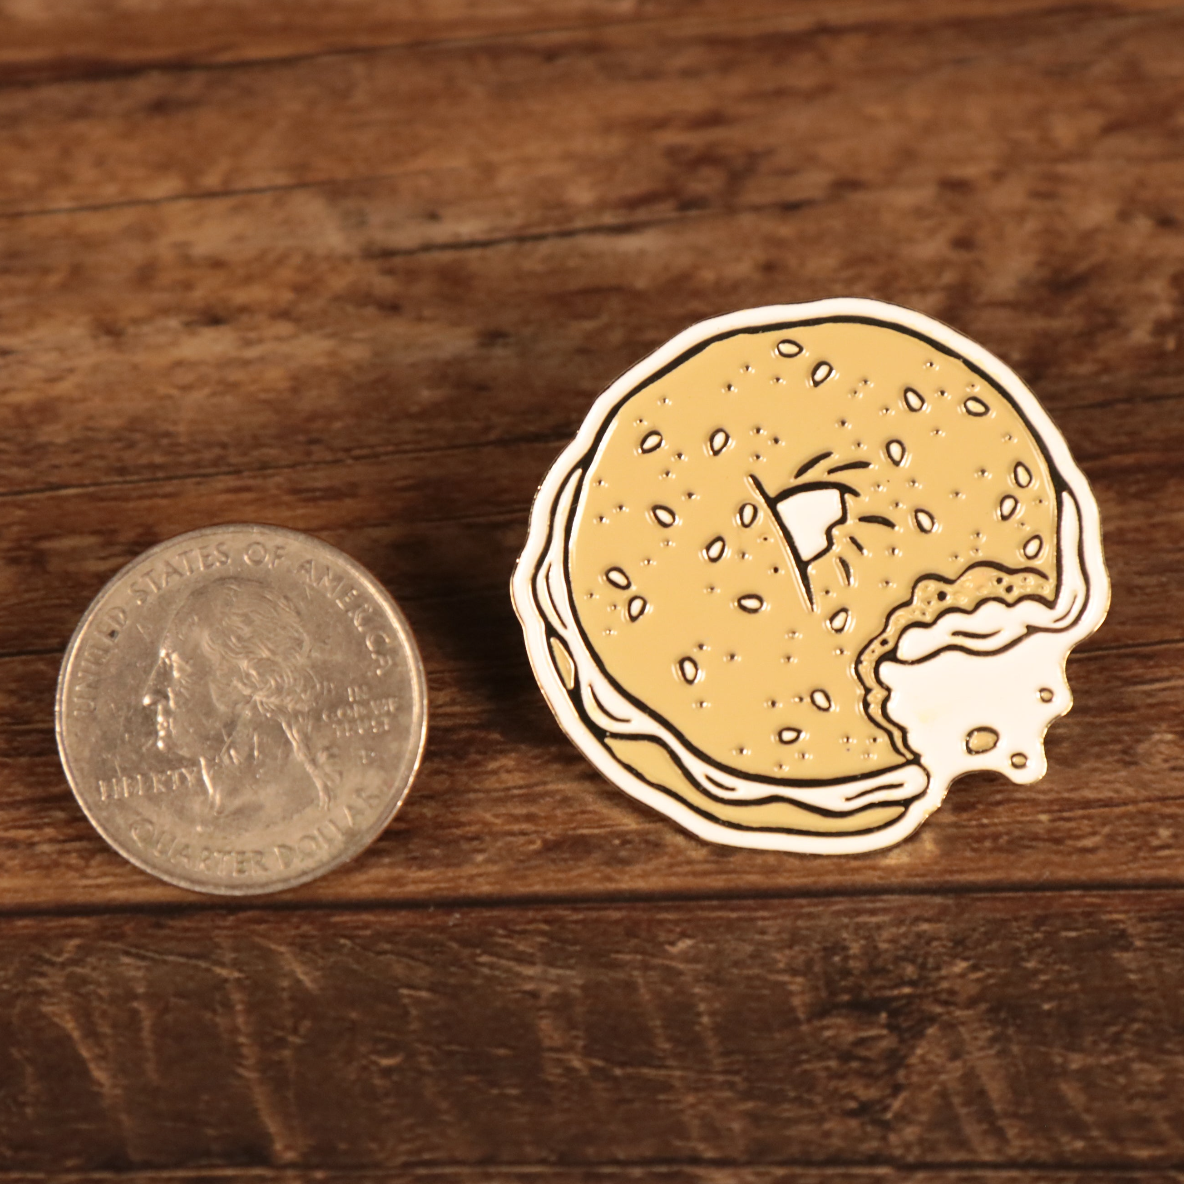 The New York Bagel Fitted Cap Pin | Enamel Pin For Hat compared to a quarter